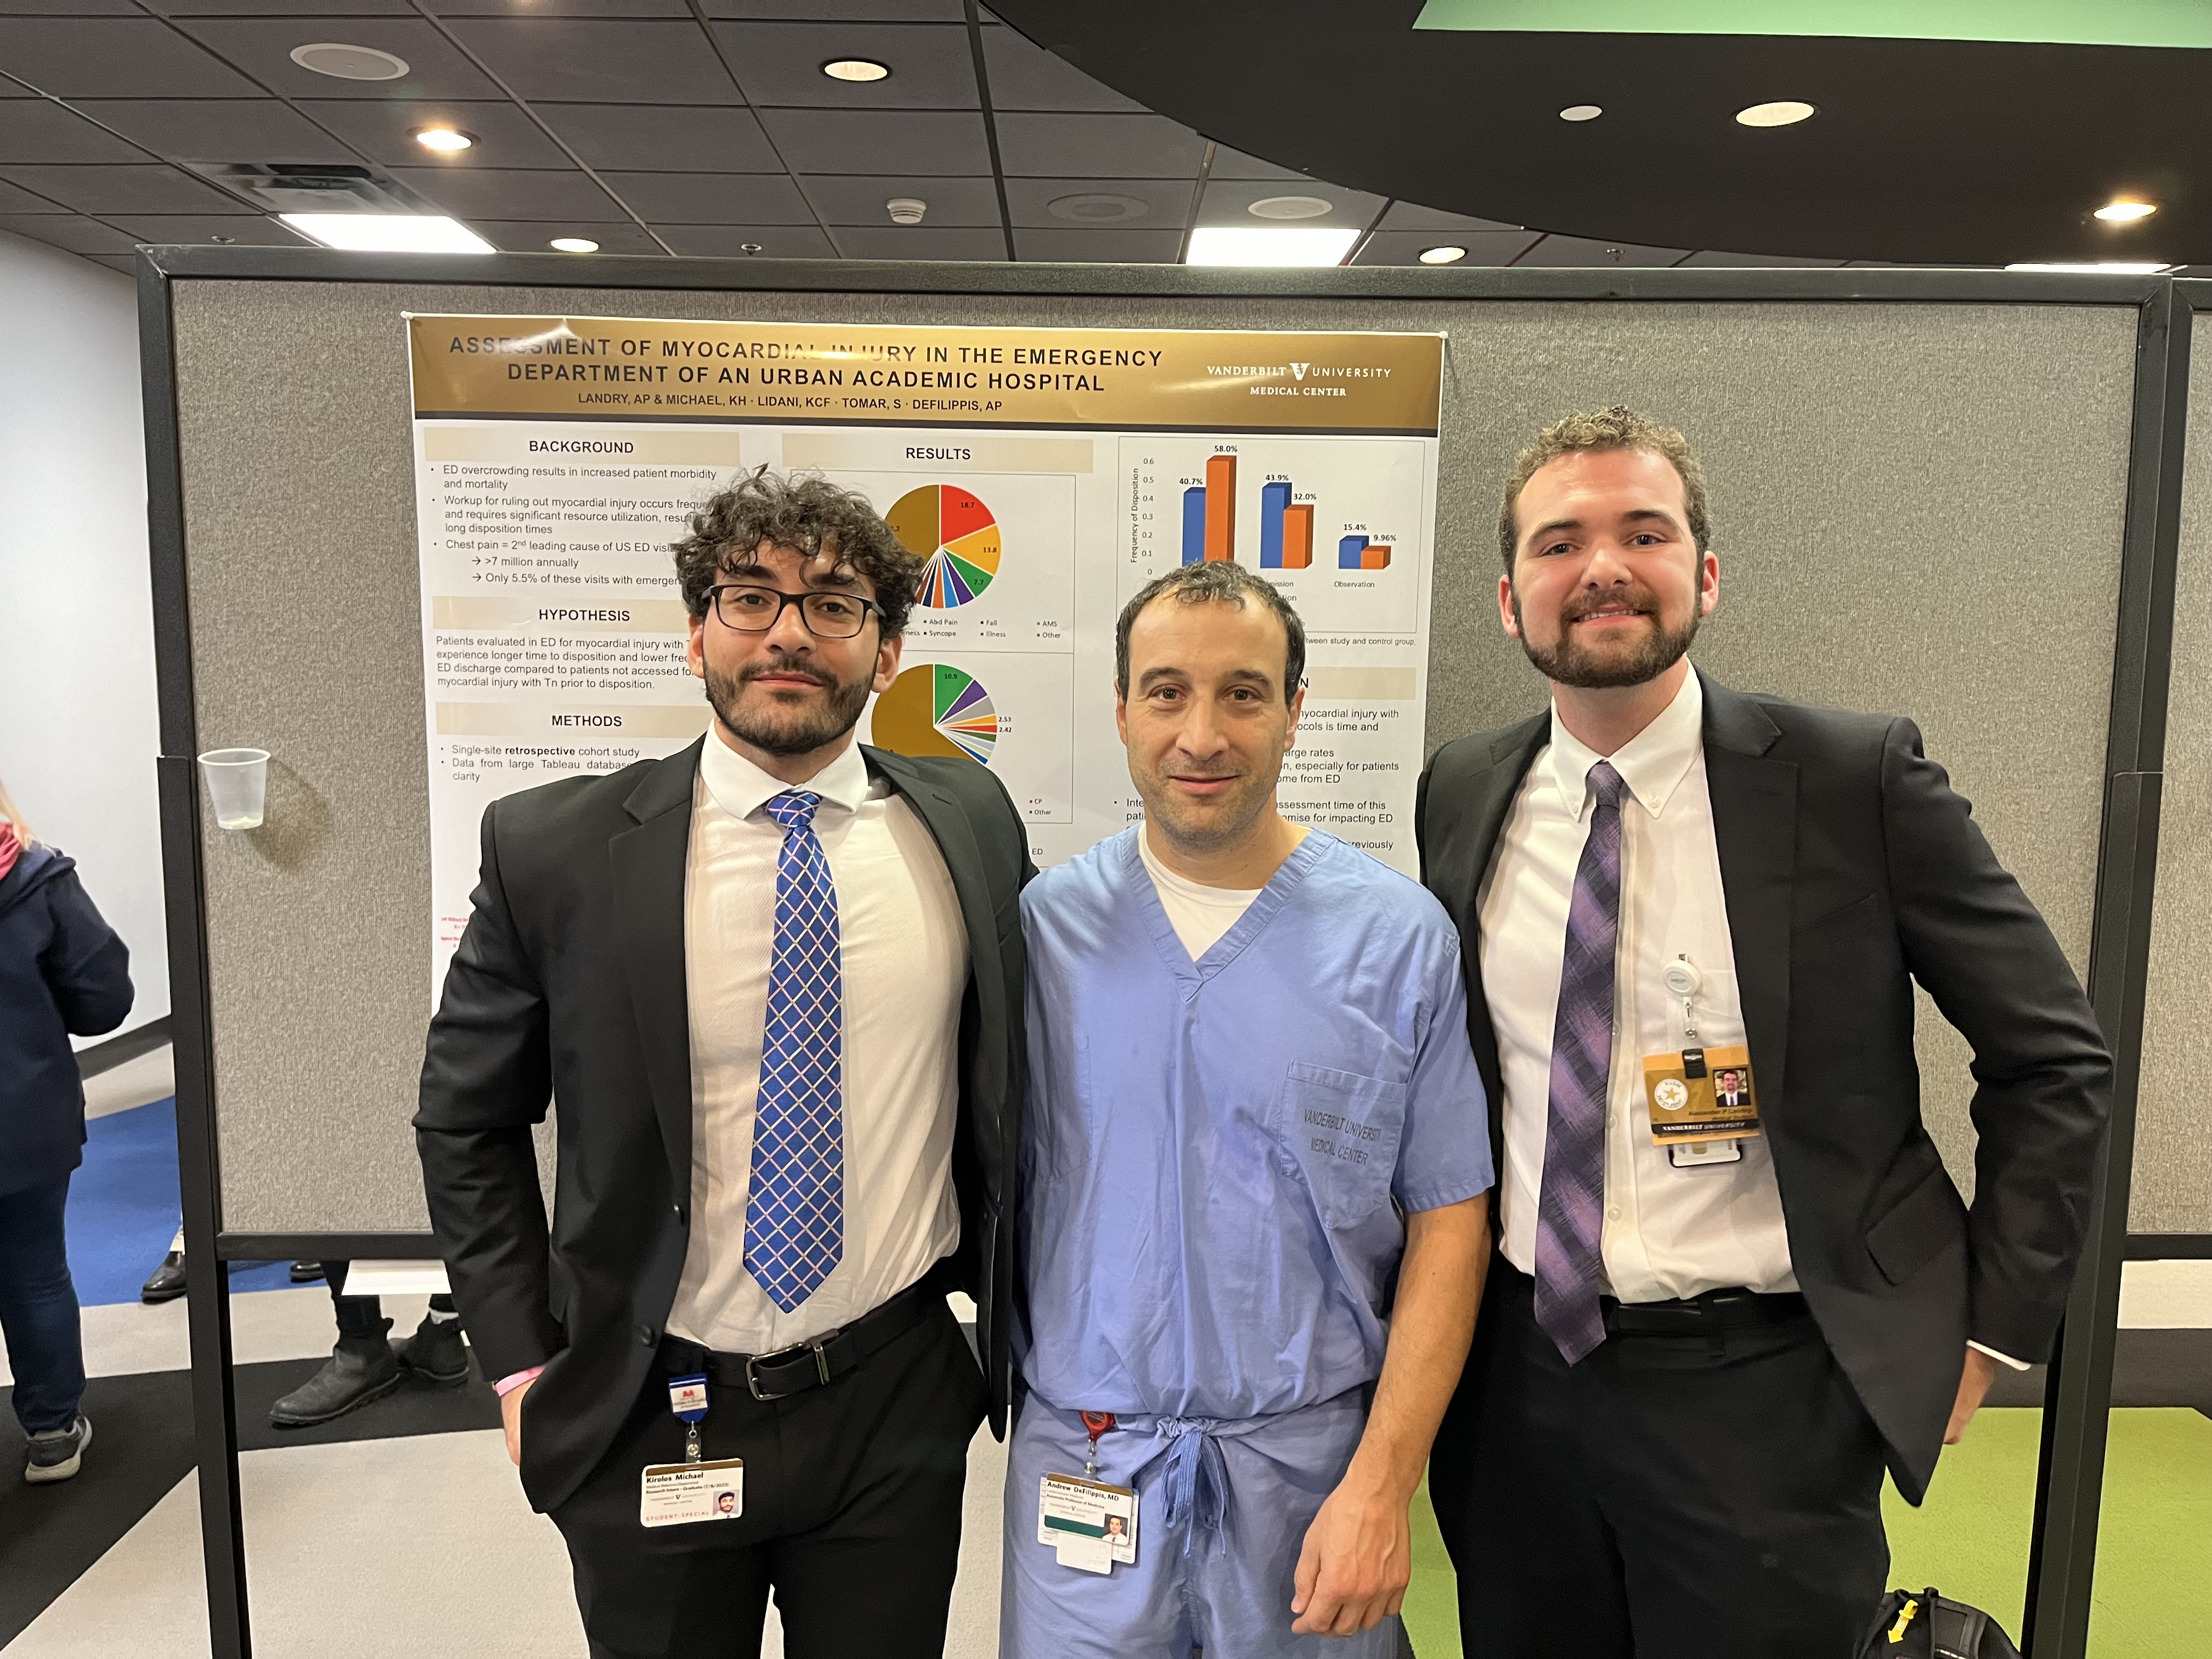 CV Research Day - Kirolos Michael, Dr. DeFilippis, and Alexander Landry